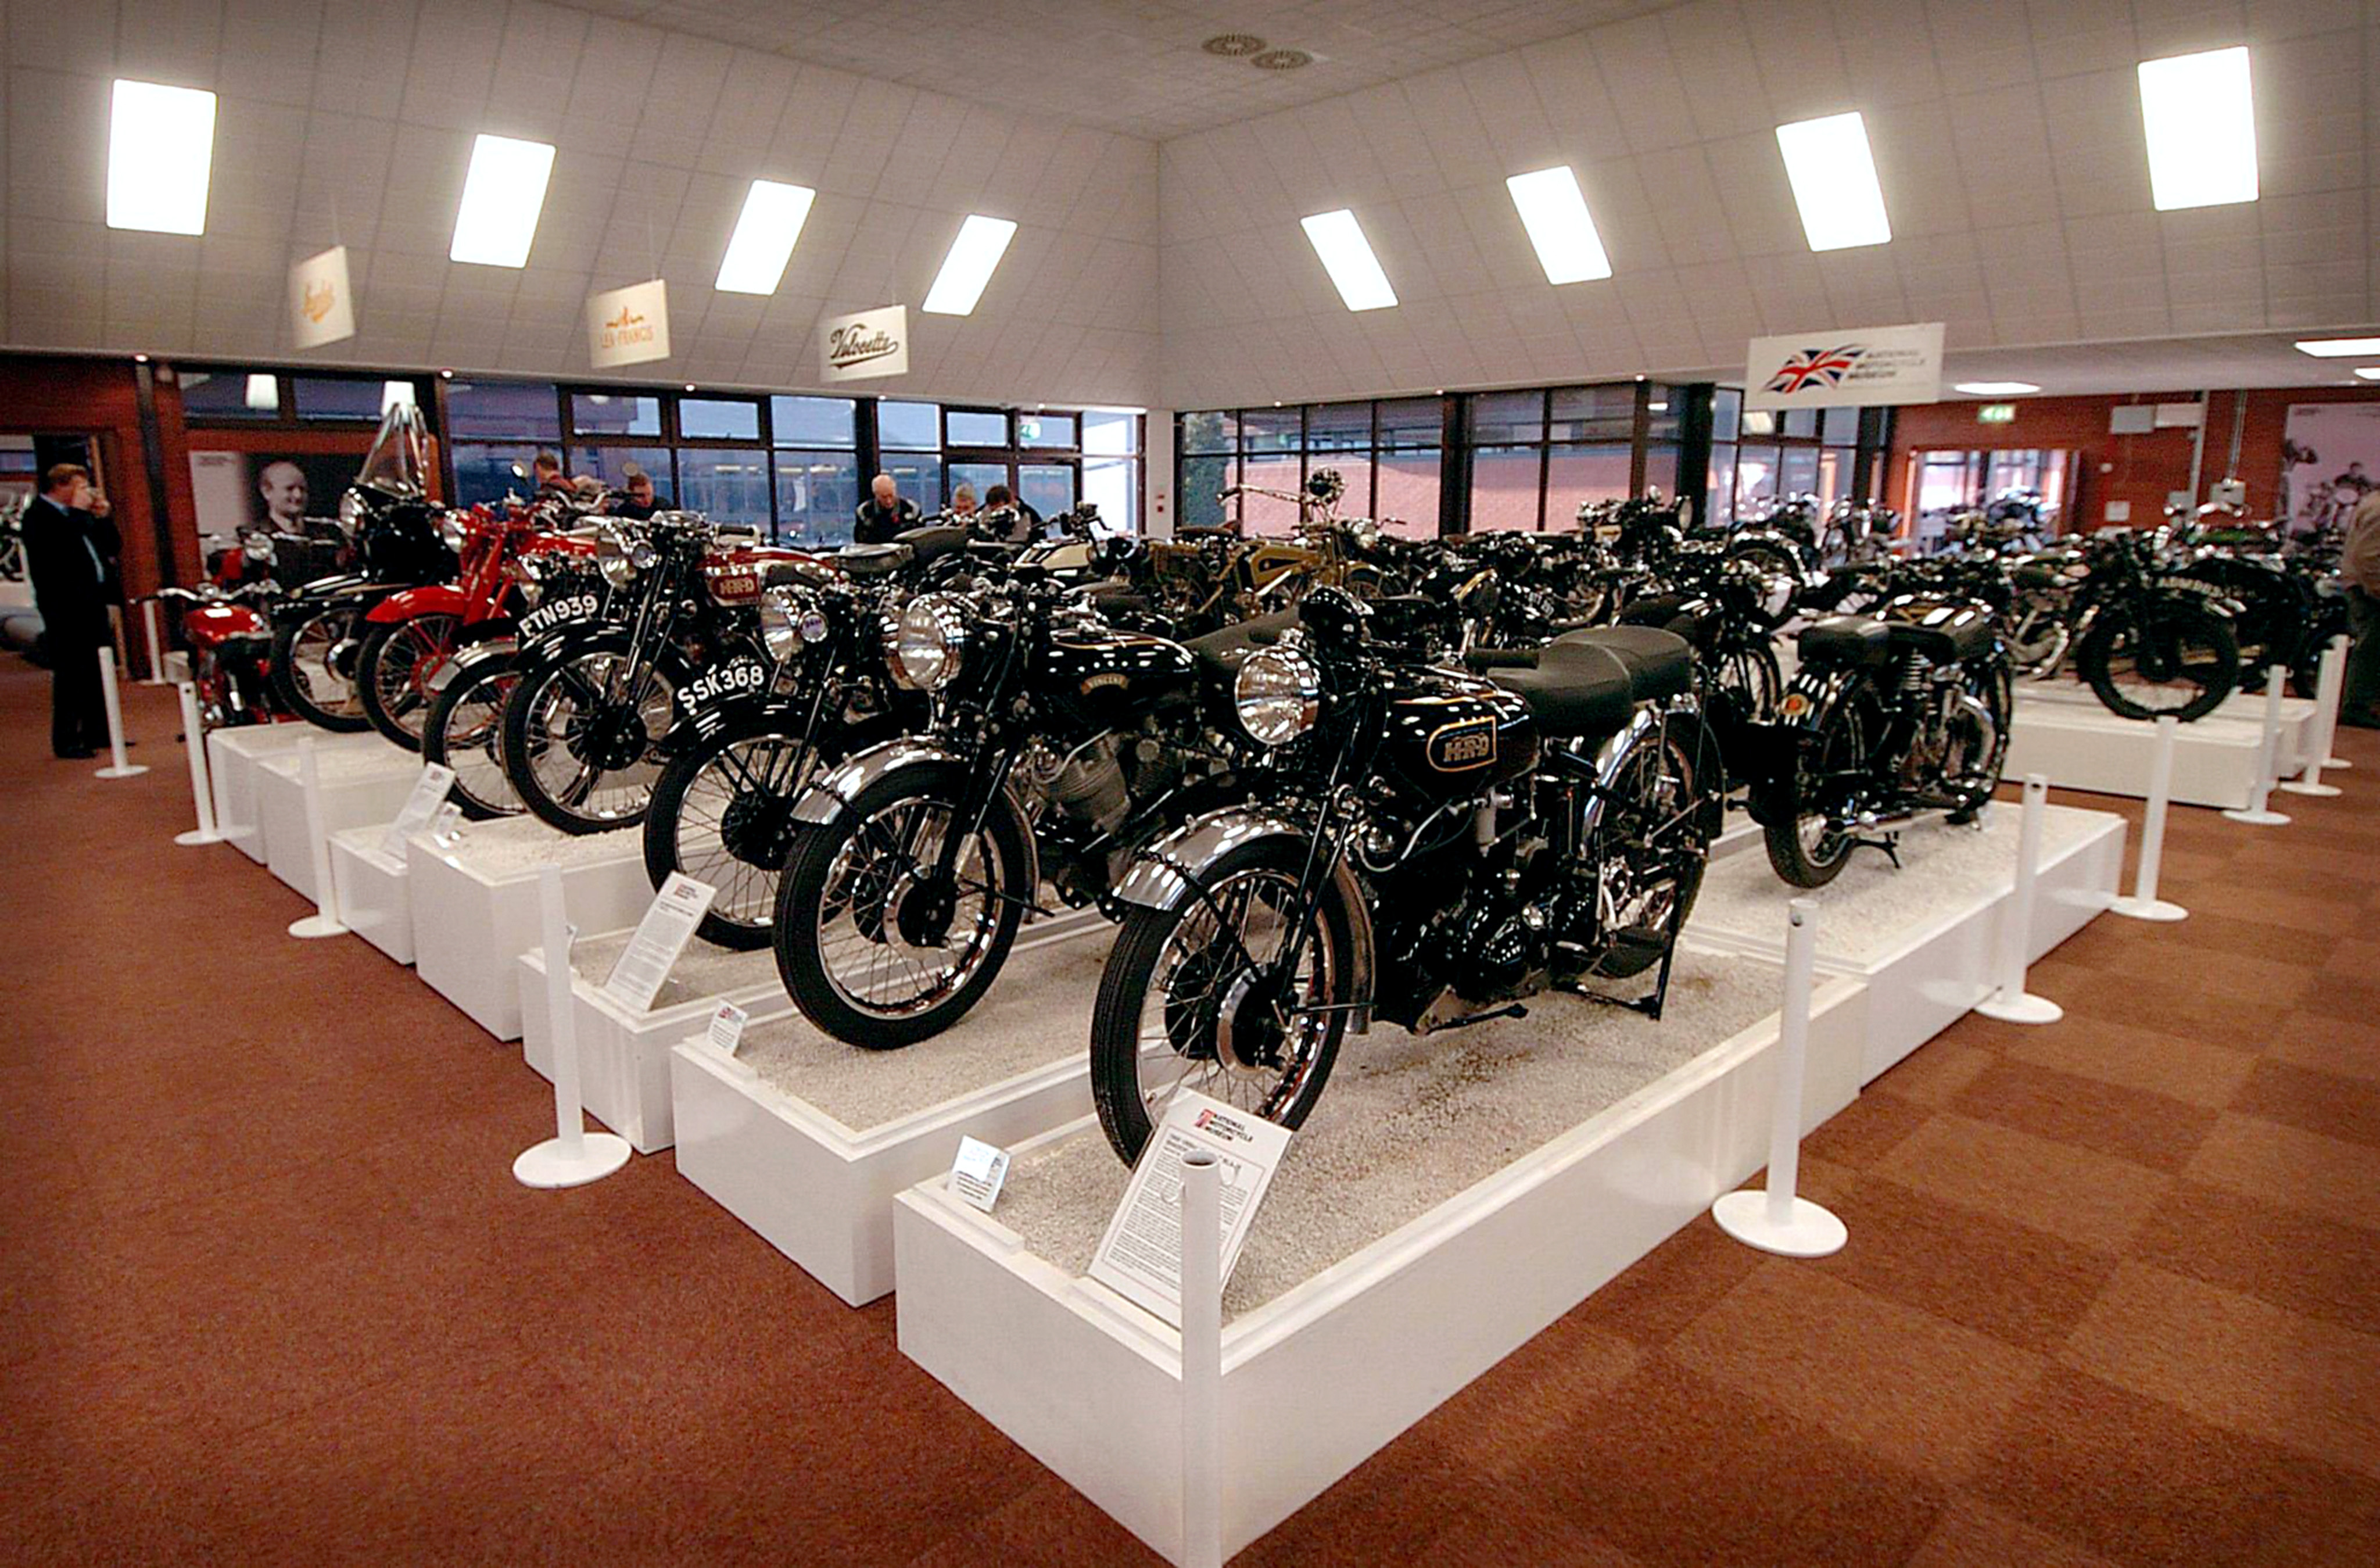 The National Motorcycle Museum has the largest collection of British bikes in the world